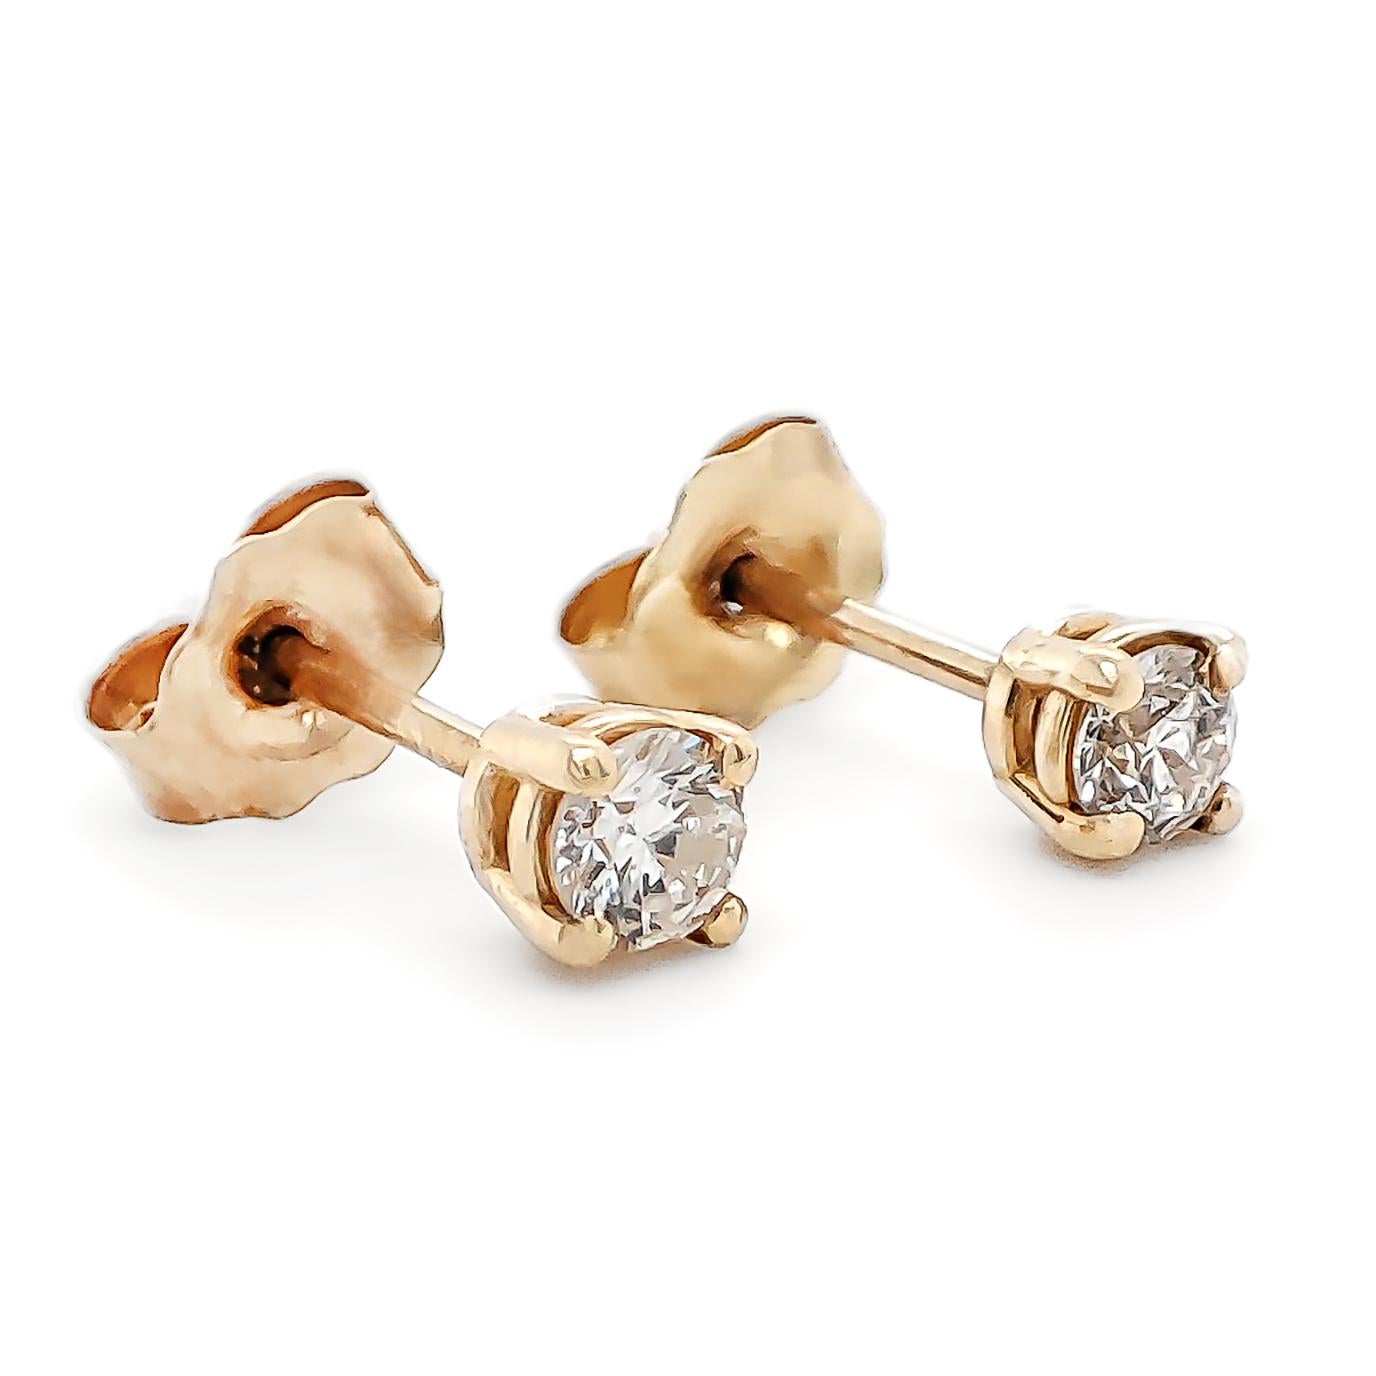 FOR U.S. BUYERS NO VAT 

If you want to add color to any style you choose, these 14kt diamond stud earrings weighing 0.53 grams are definitely for you. These gorgeous earrings feature two round brilliant cuts set in 14kt Yellow gold totaling 0.18